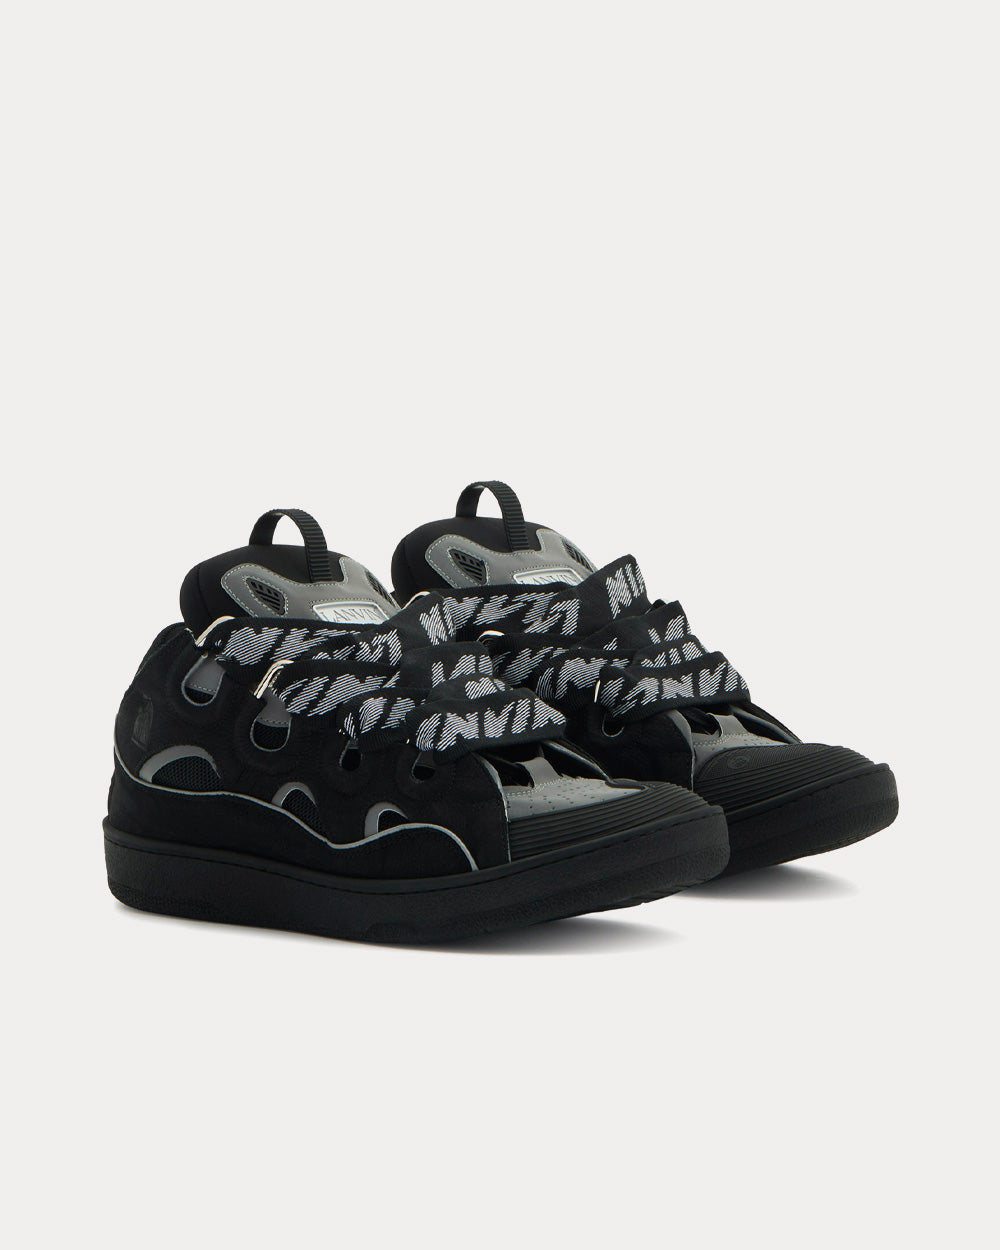 Lanvin - Curb Leather Black Low Top Sneakers